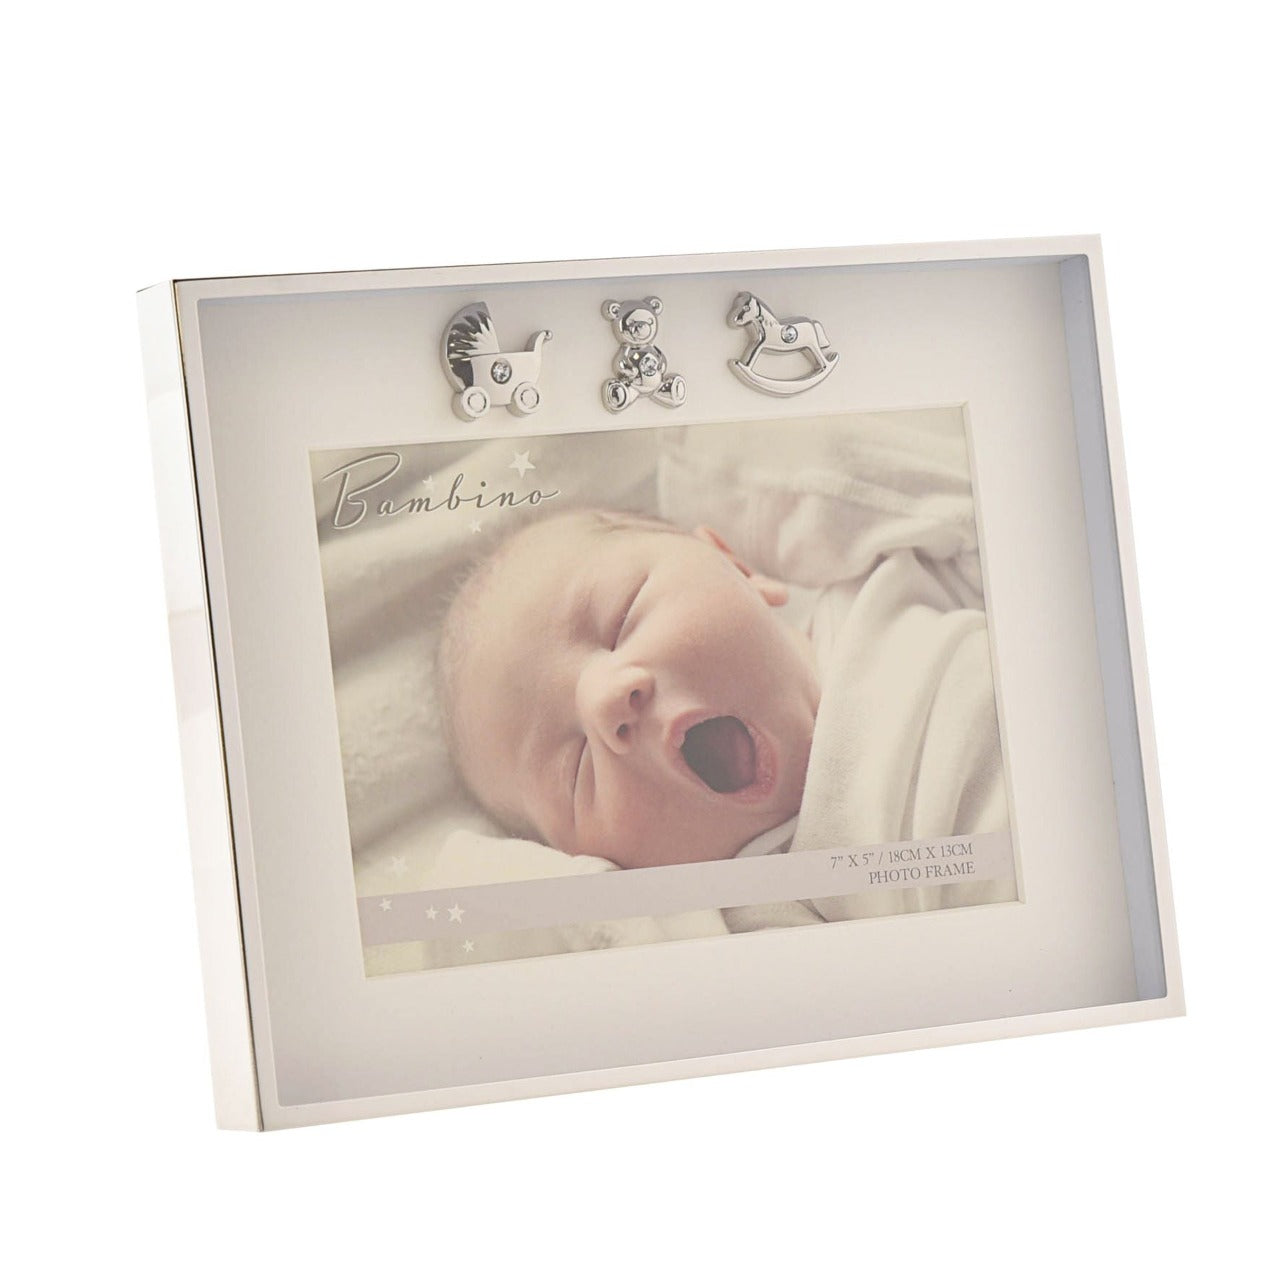 Bambino Thin Silver Plated Photo Frame 7" x 5"  A gorgeous 7" x 5" silver plated photo frame from BAMBINO BY JULIANA®. The box frame is embellished with crystal finished teddy bear, pram and rocking horse icons and features a crisp white mount and standing strut.